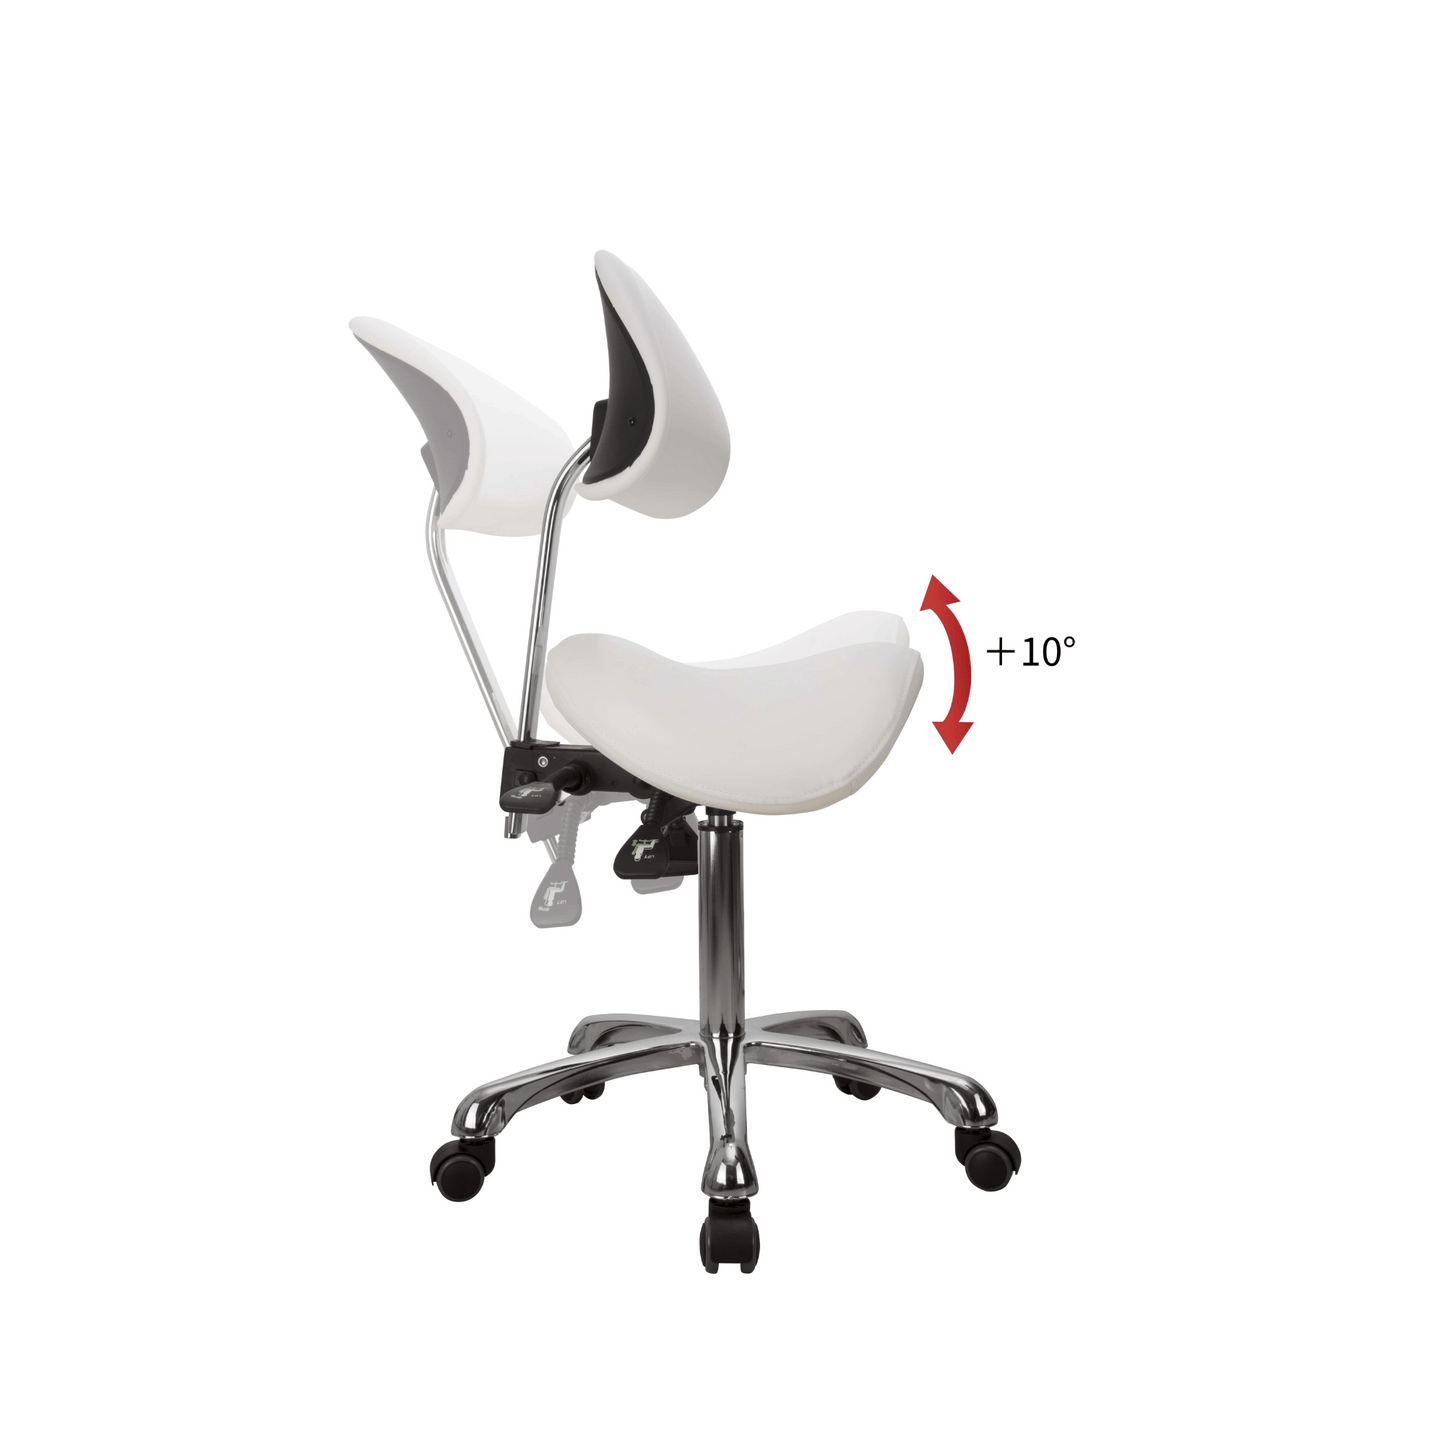 The Lolli Saddle Stool White Adjustable height and back Image 2